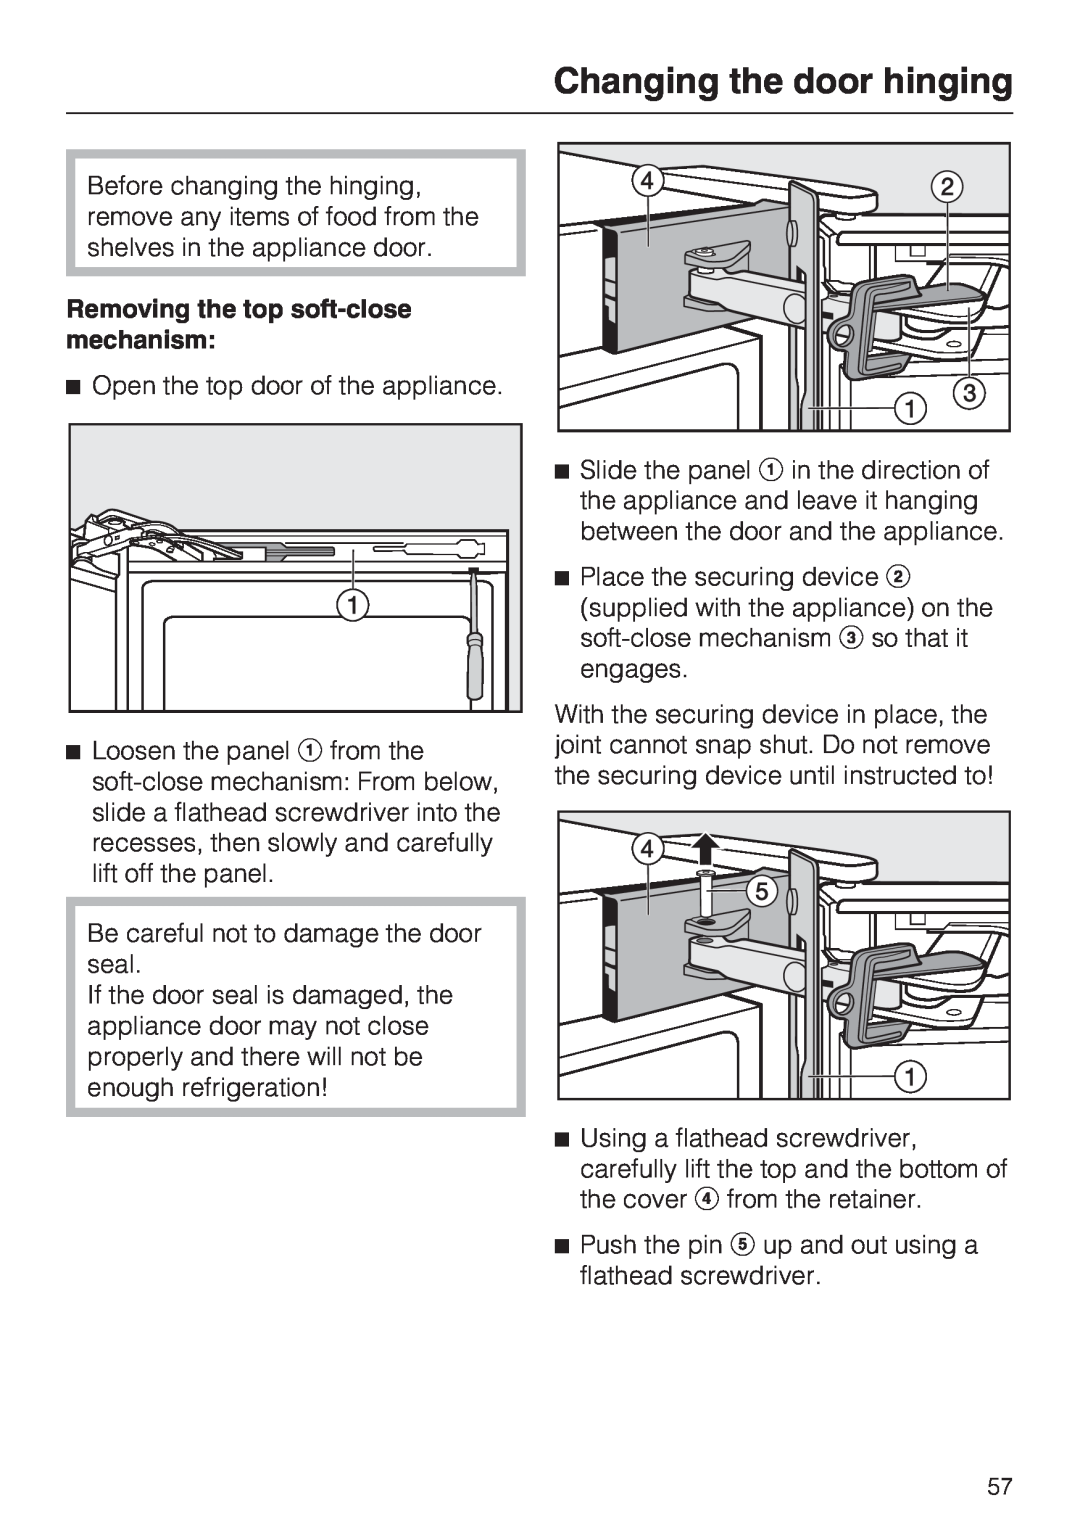 Miele KFN 14943 SDE ED installation instructions Removing the top soft-closemechanism, Changing the door hinging 